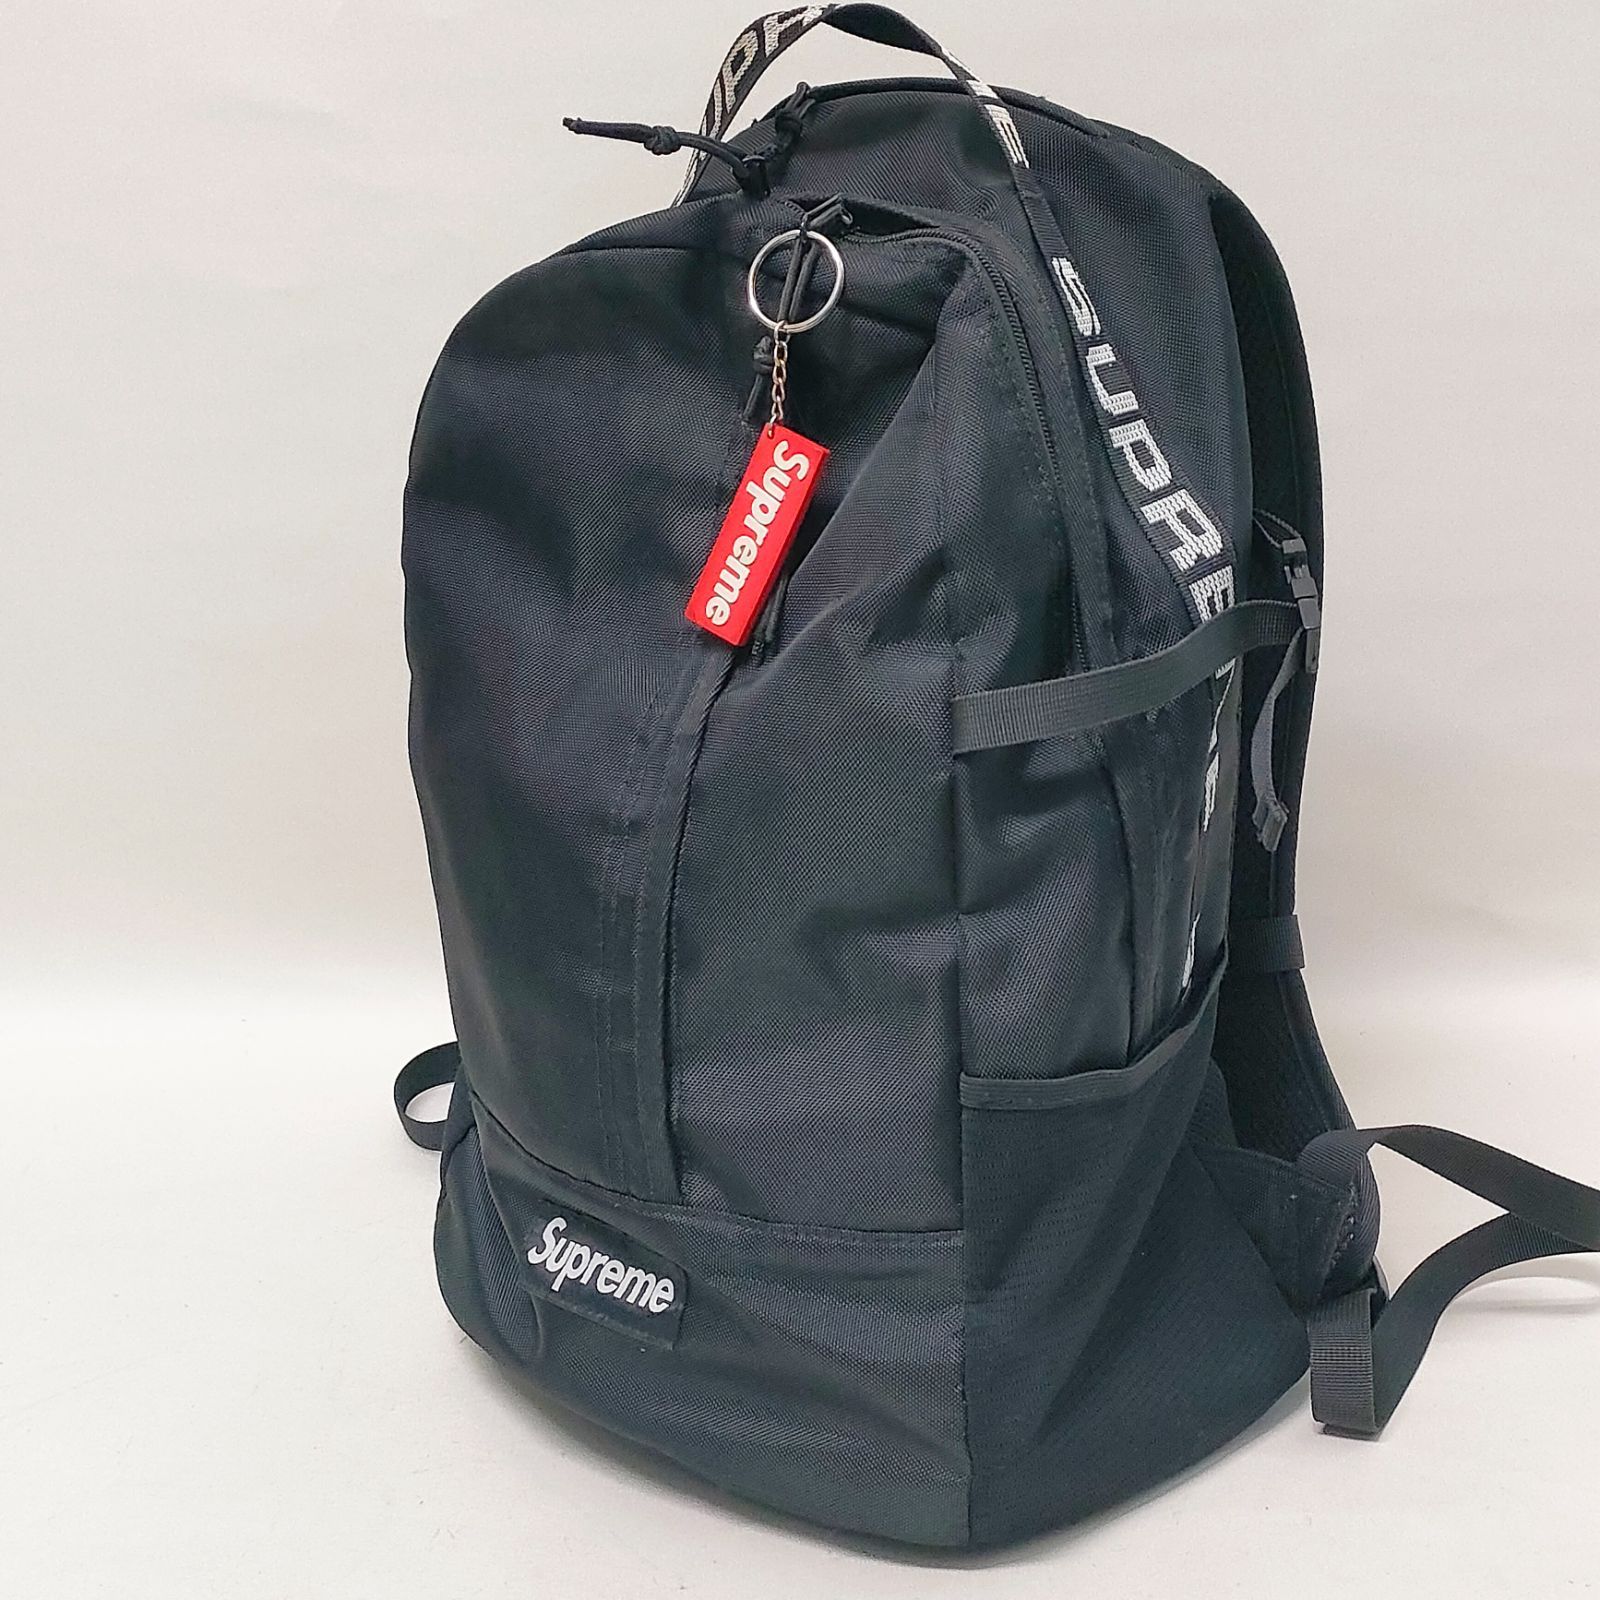 Supreme 18ss Backpackバッグ - バッグパック/リュック